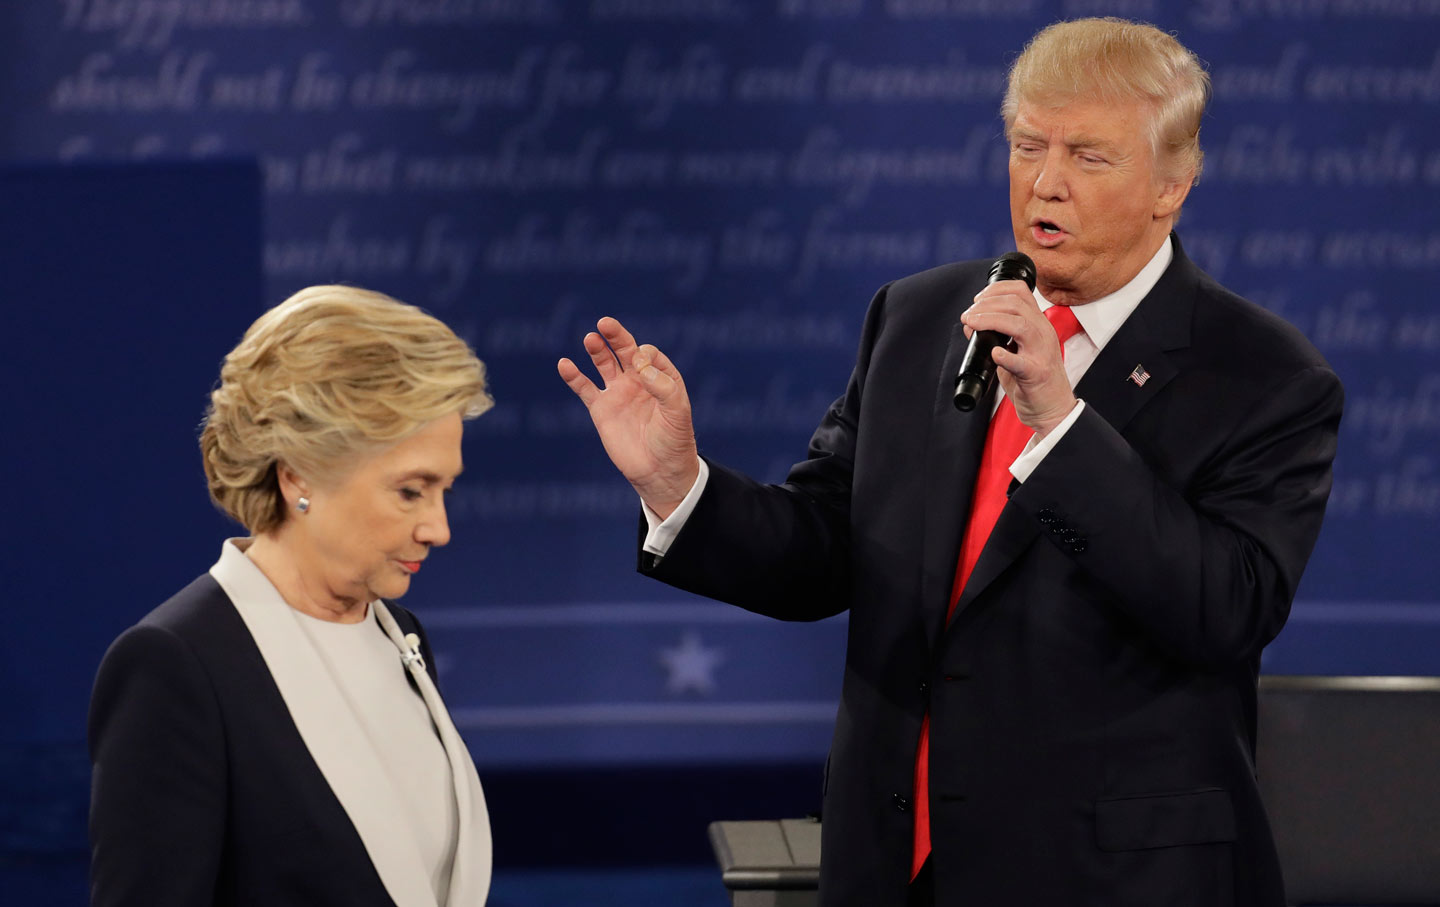 What if the Next Presidential Debate Actually Covered Critical Issues? | The Nation